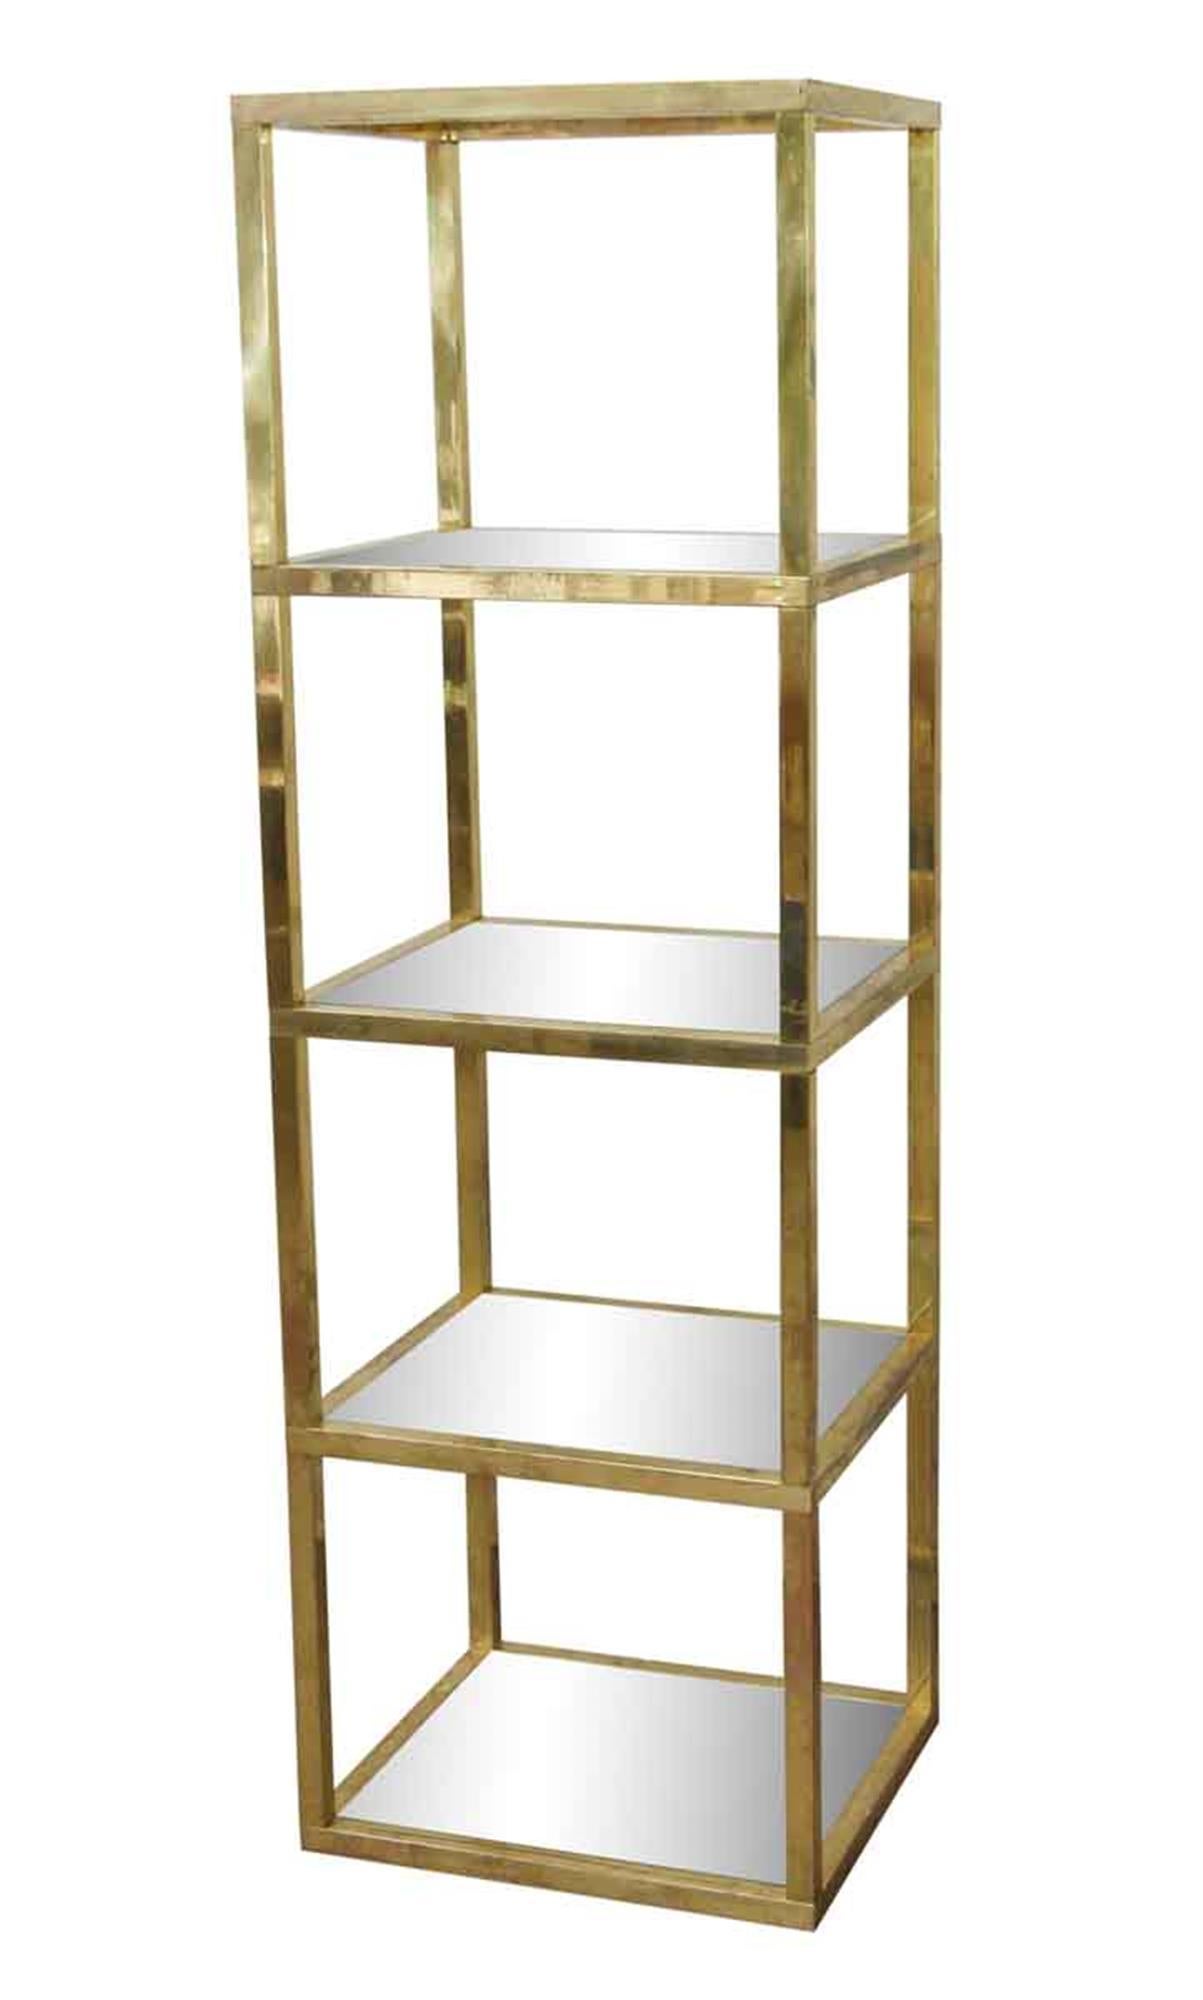 1970s tall polished brass shelf units with five glass shelves done in a Mid-Century Modern style. Priced as a pair. This can be seen at our 5 East 16th St location on Union Square in Manhattan.